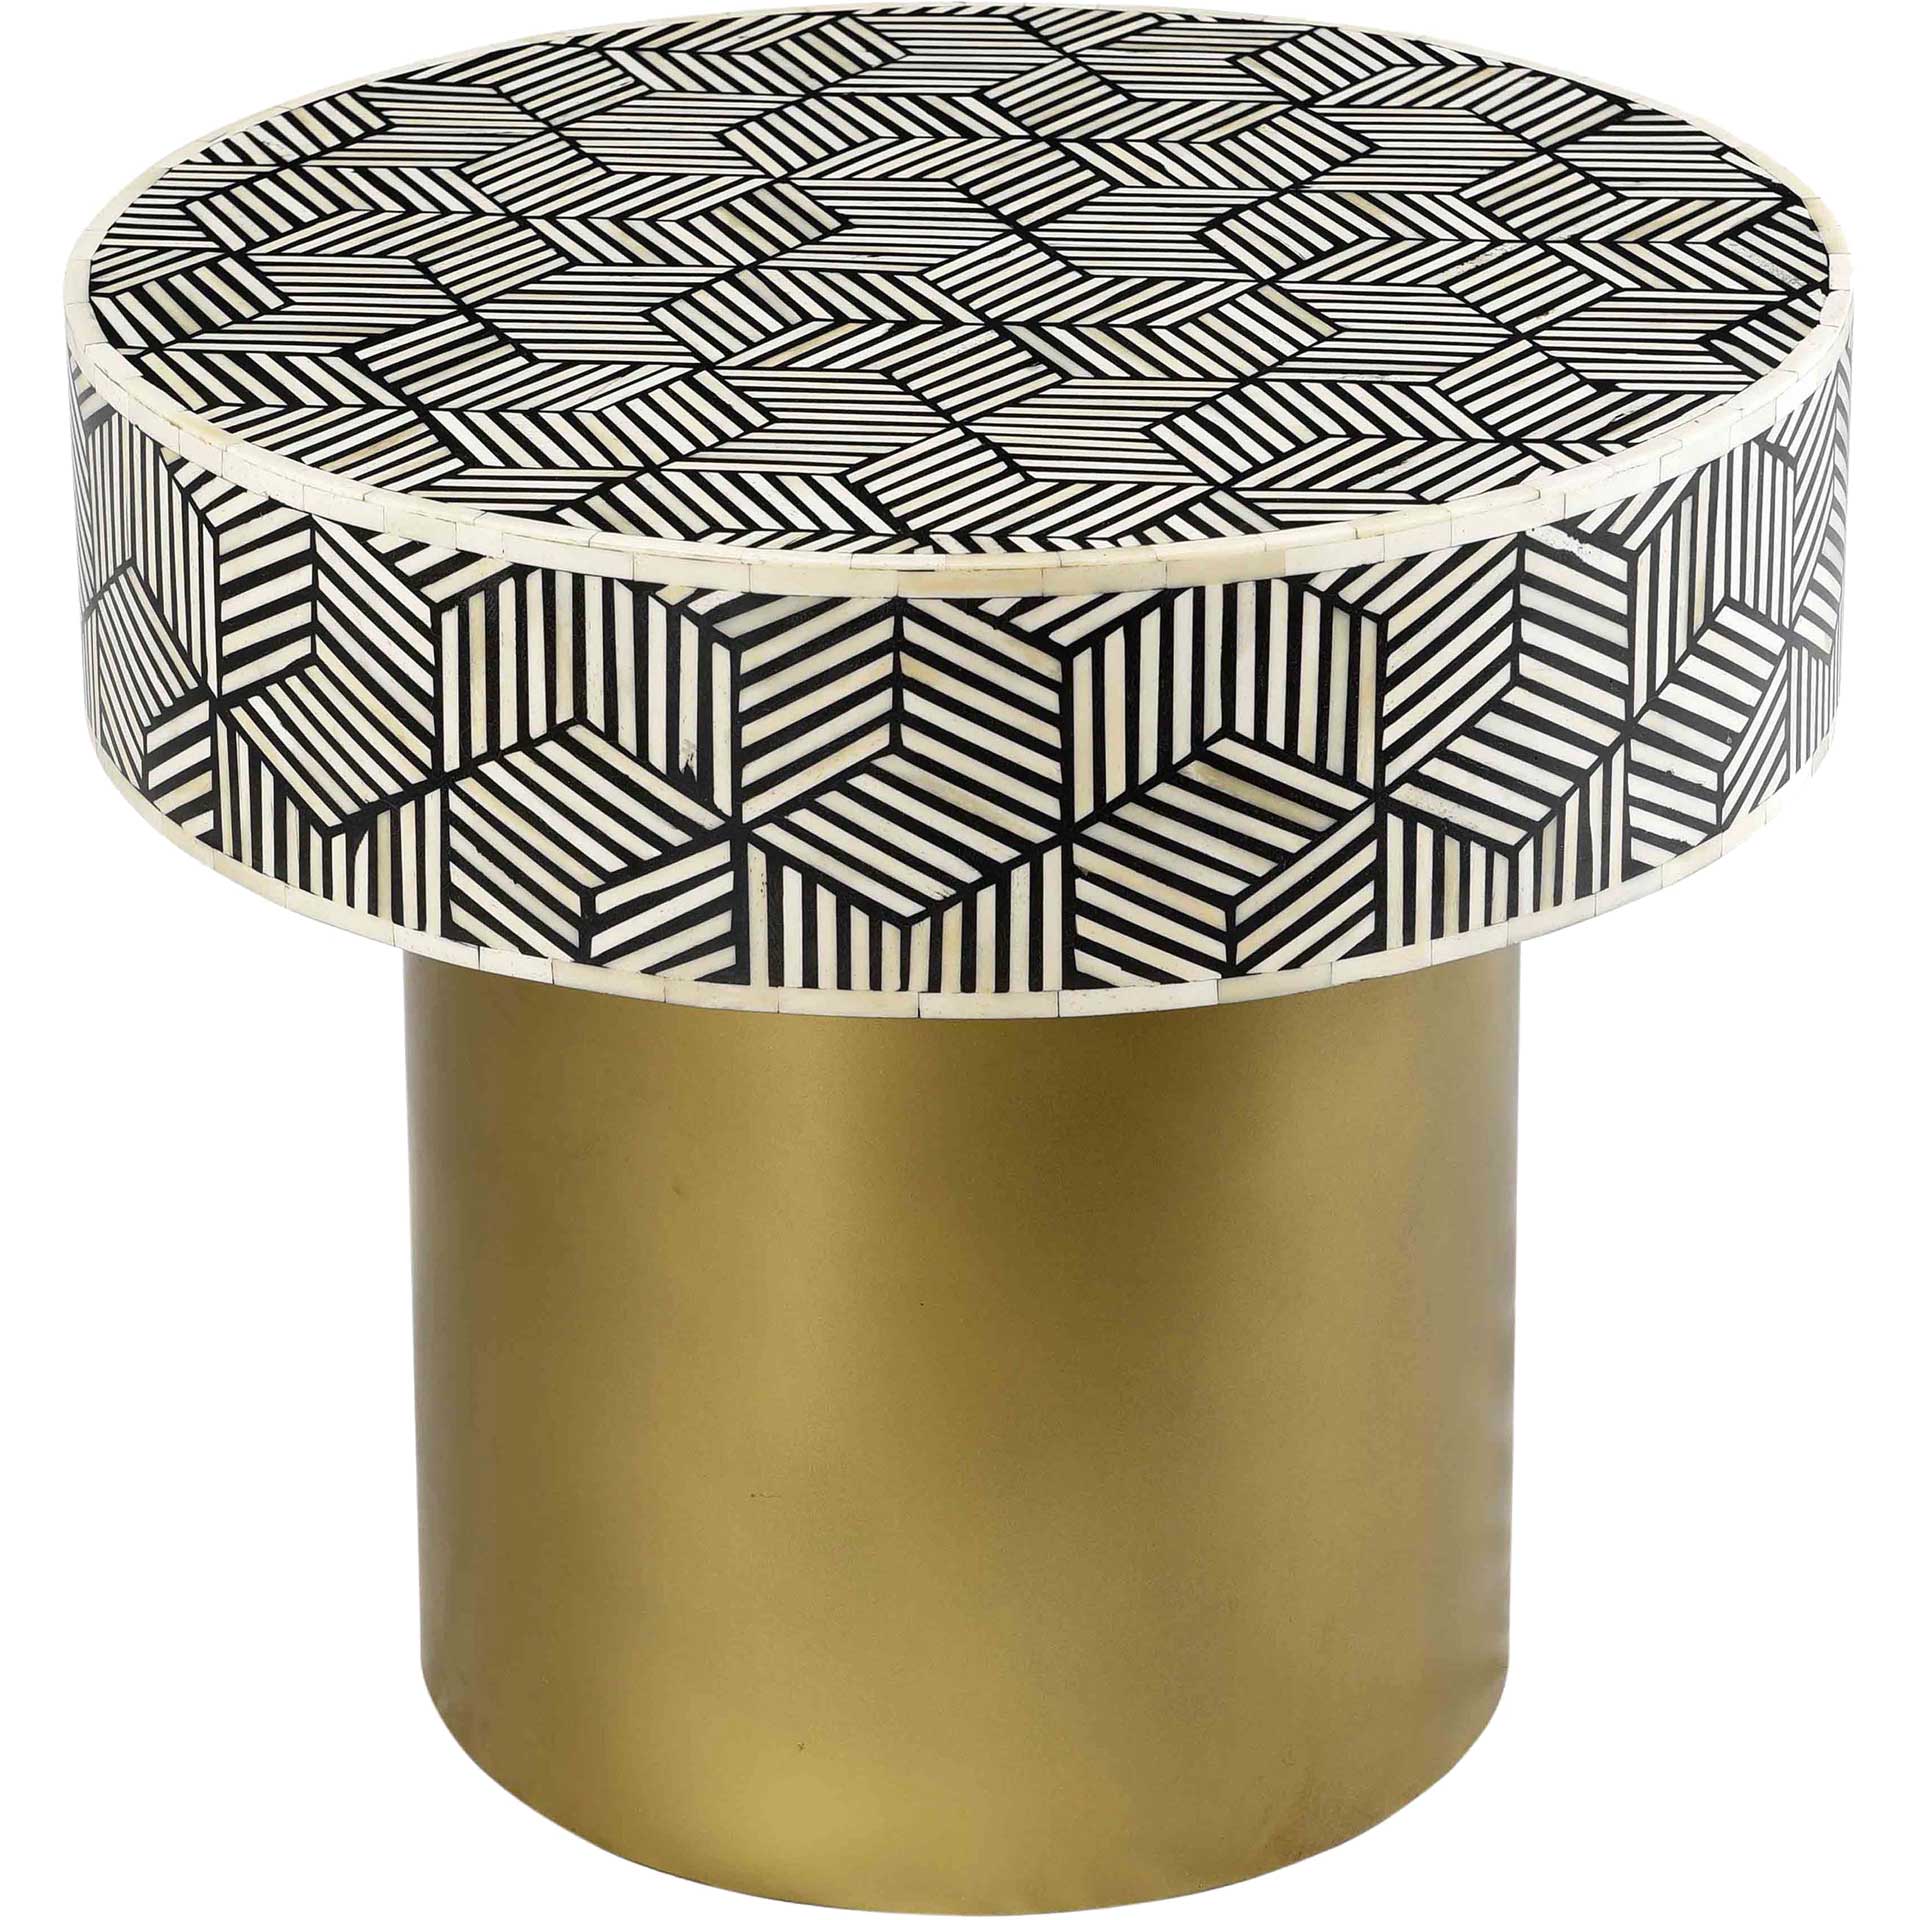 Bowen Inlay Round Side Table Black And White